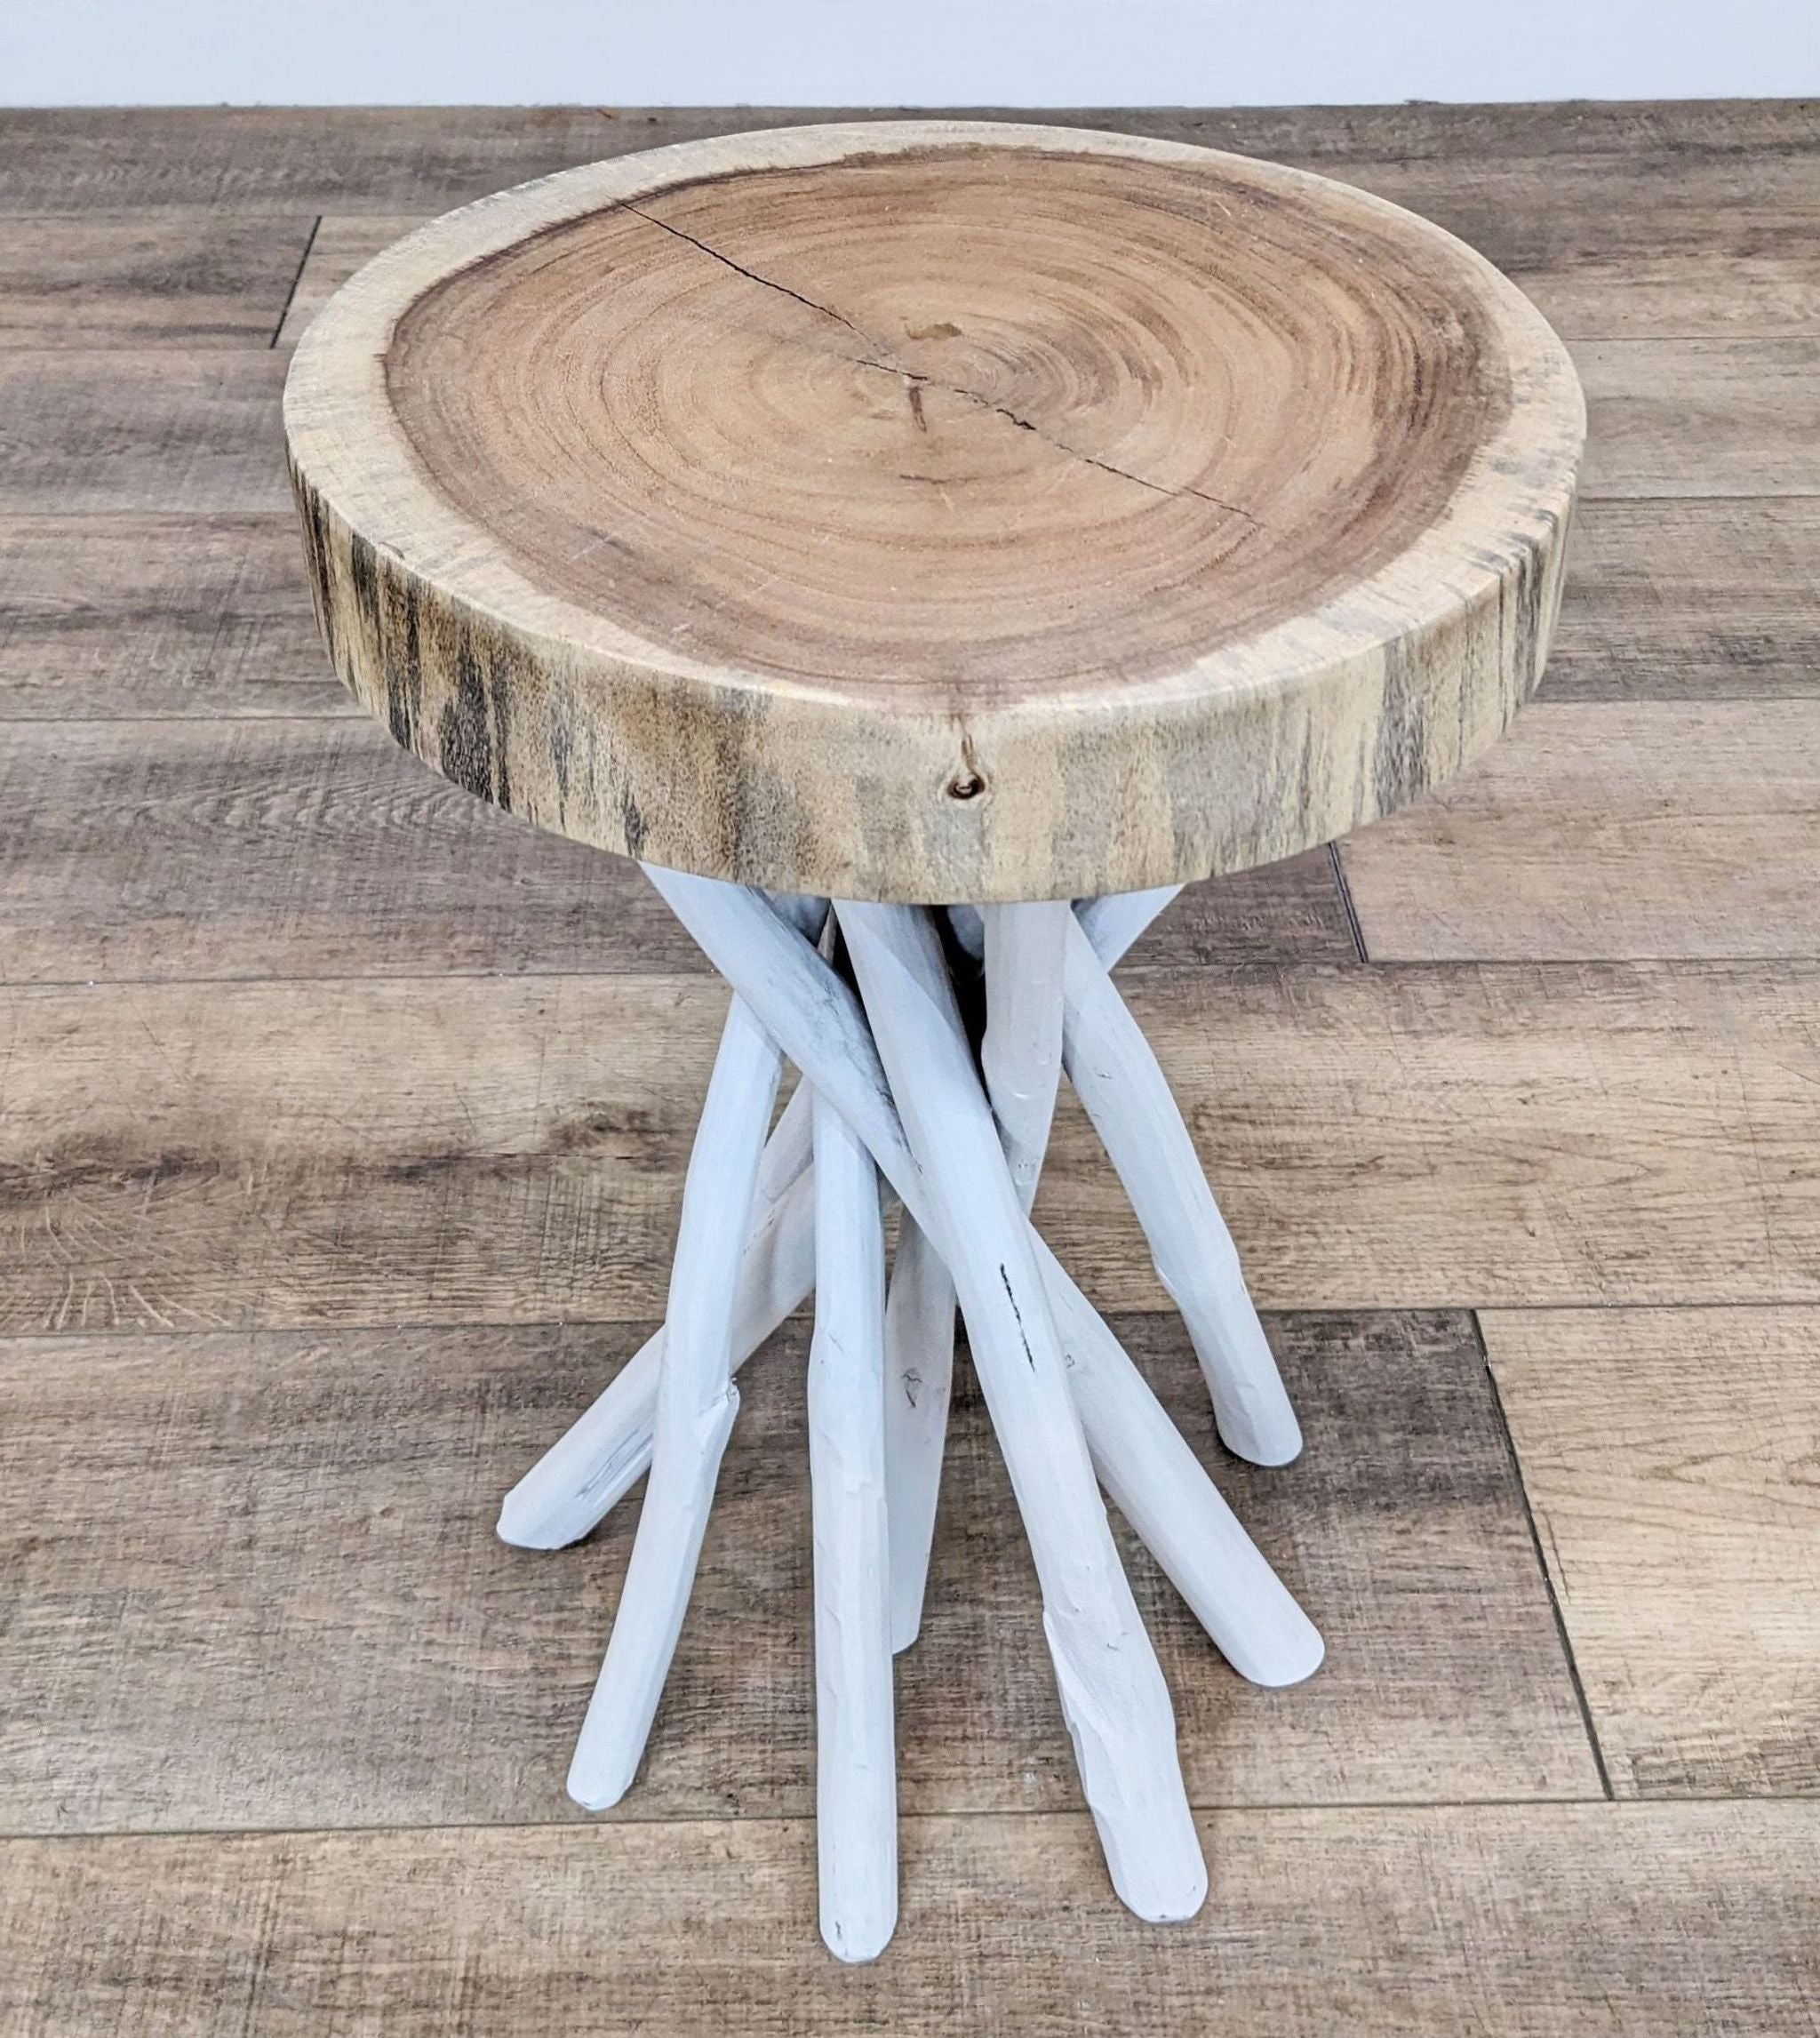 Reperch branded side table with a natural wood top and white multi-branch base on a wooden floor.